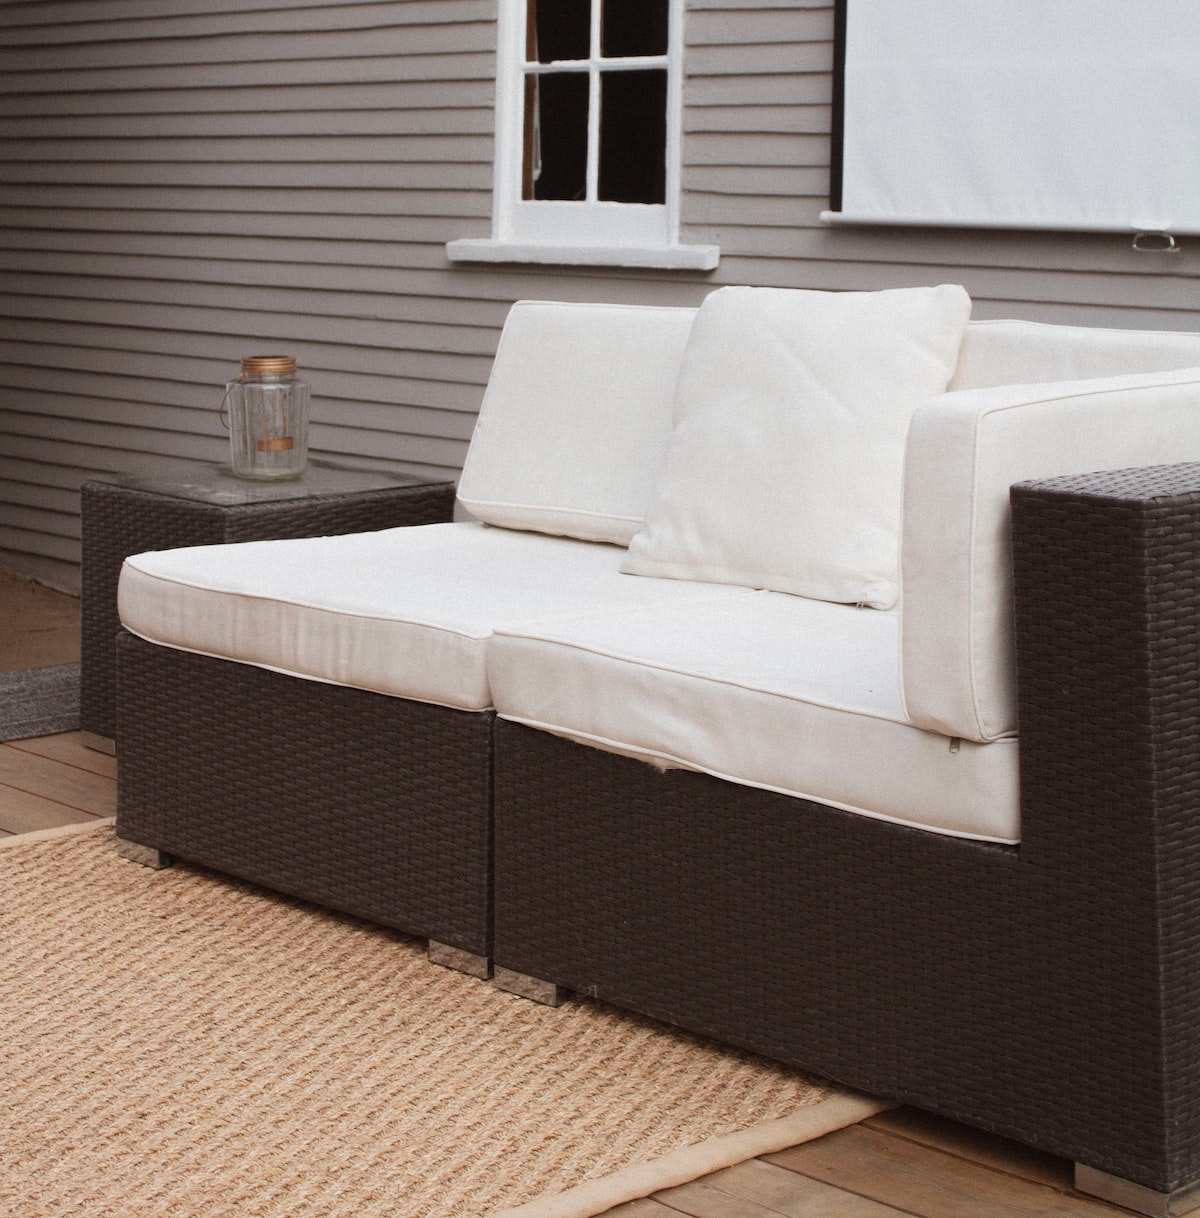 How to Care for Your Outdoor Rattan Furniture